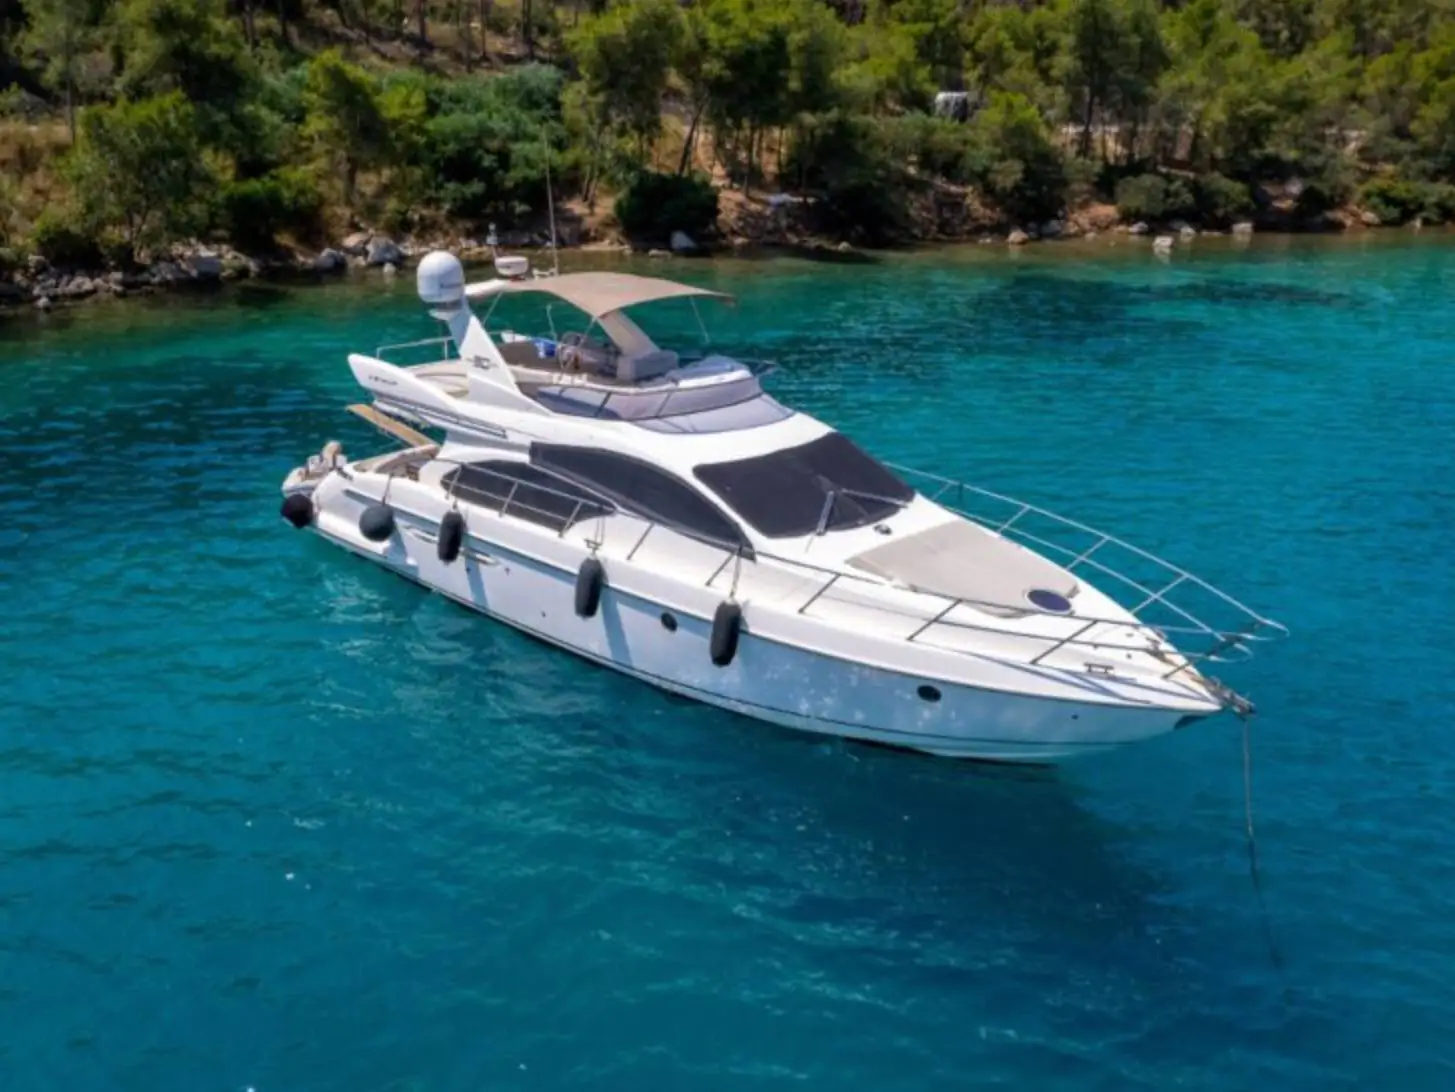 Yacht Charter in Bodrum